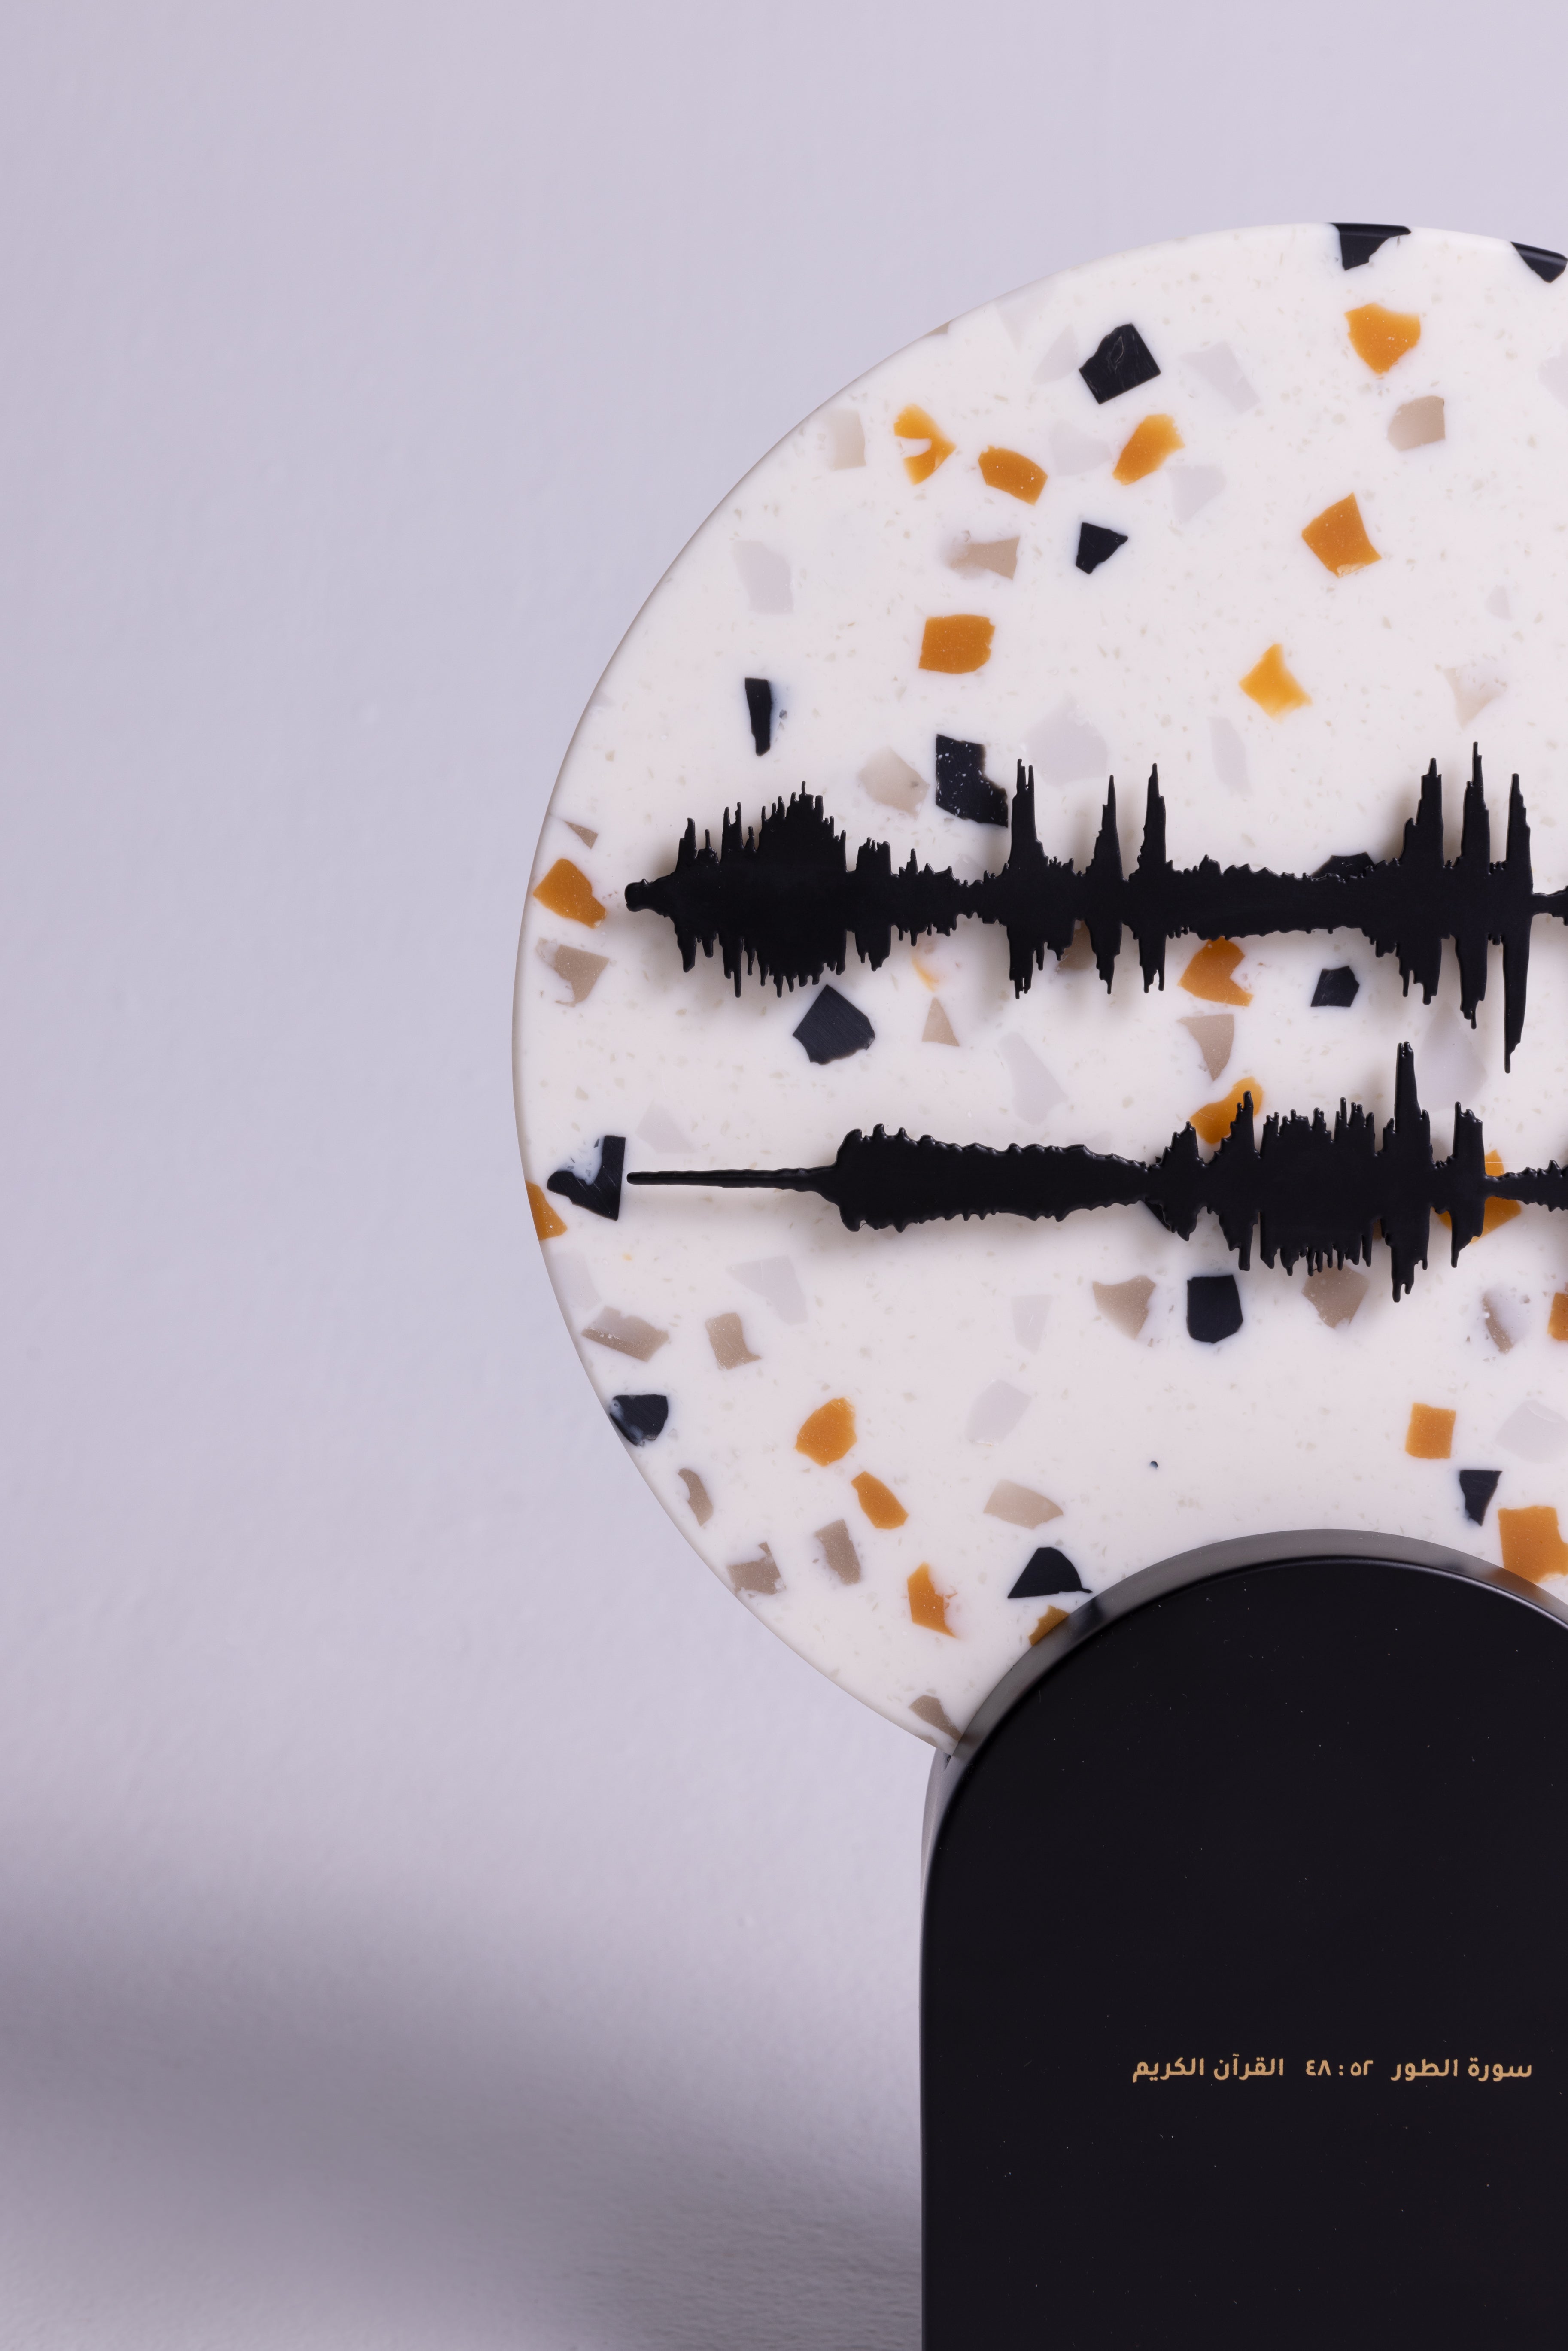 soundwaves object of art for luxury home decor made of terrazzo and steel